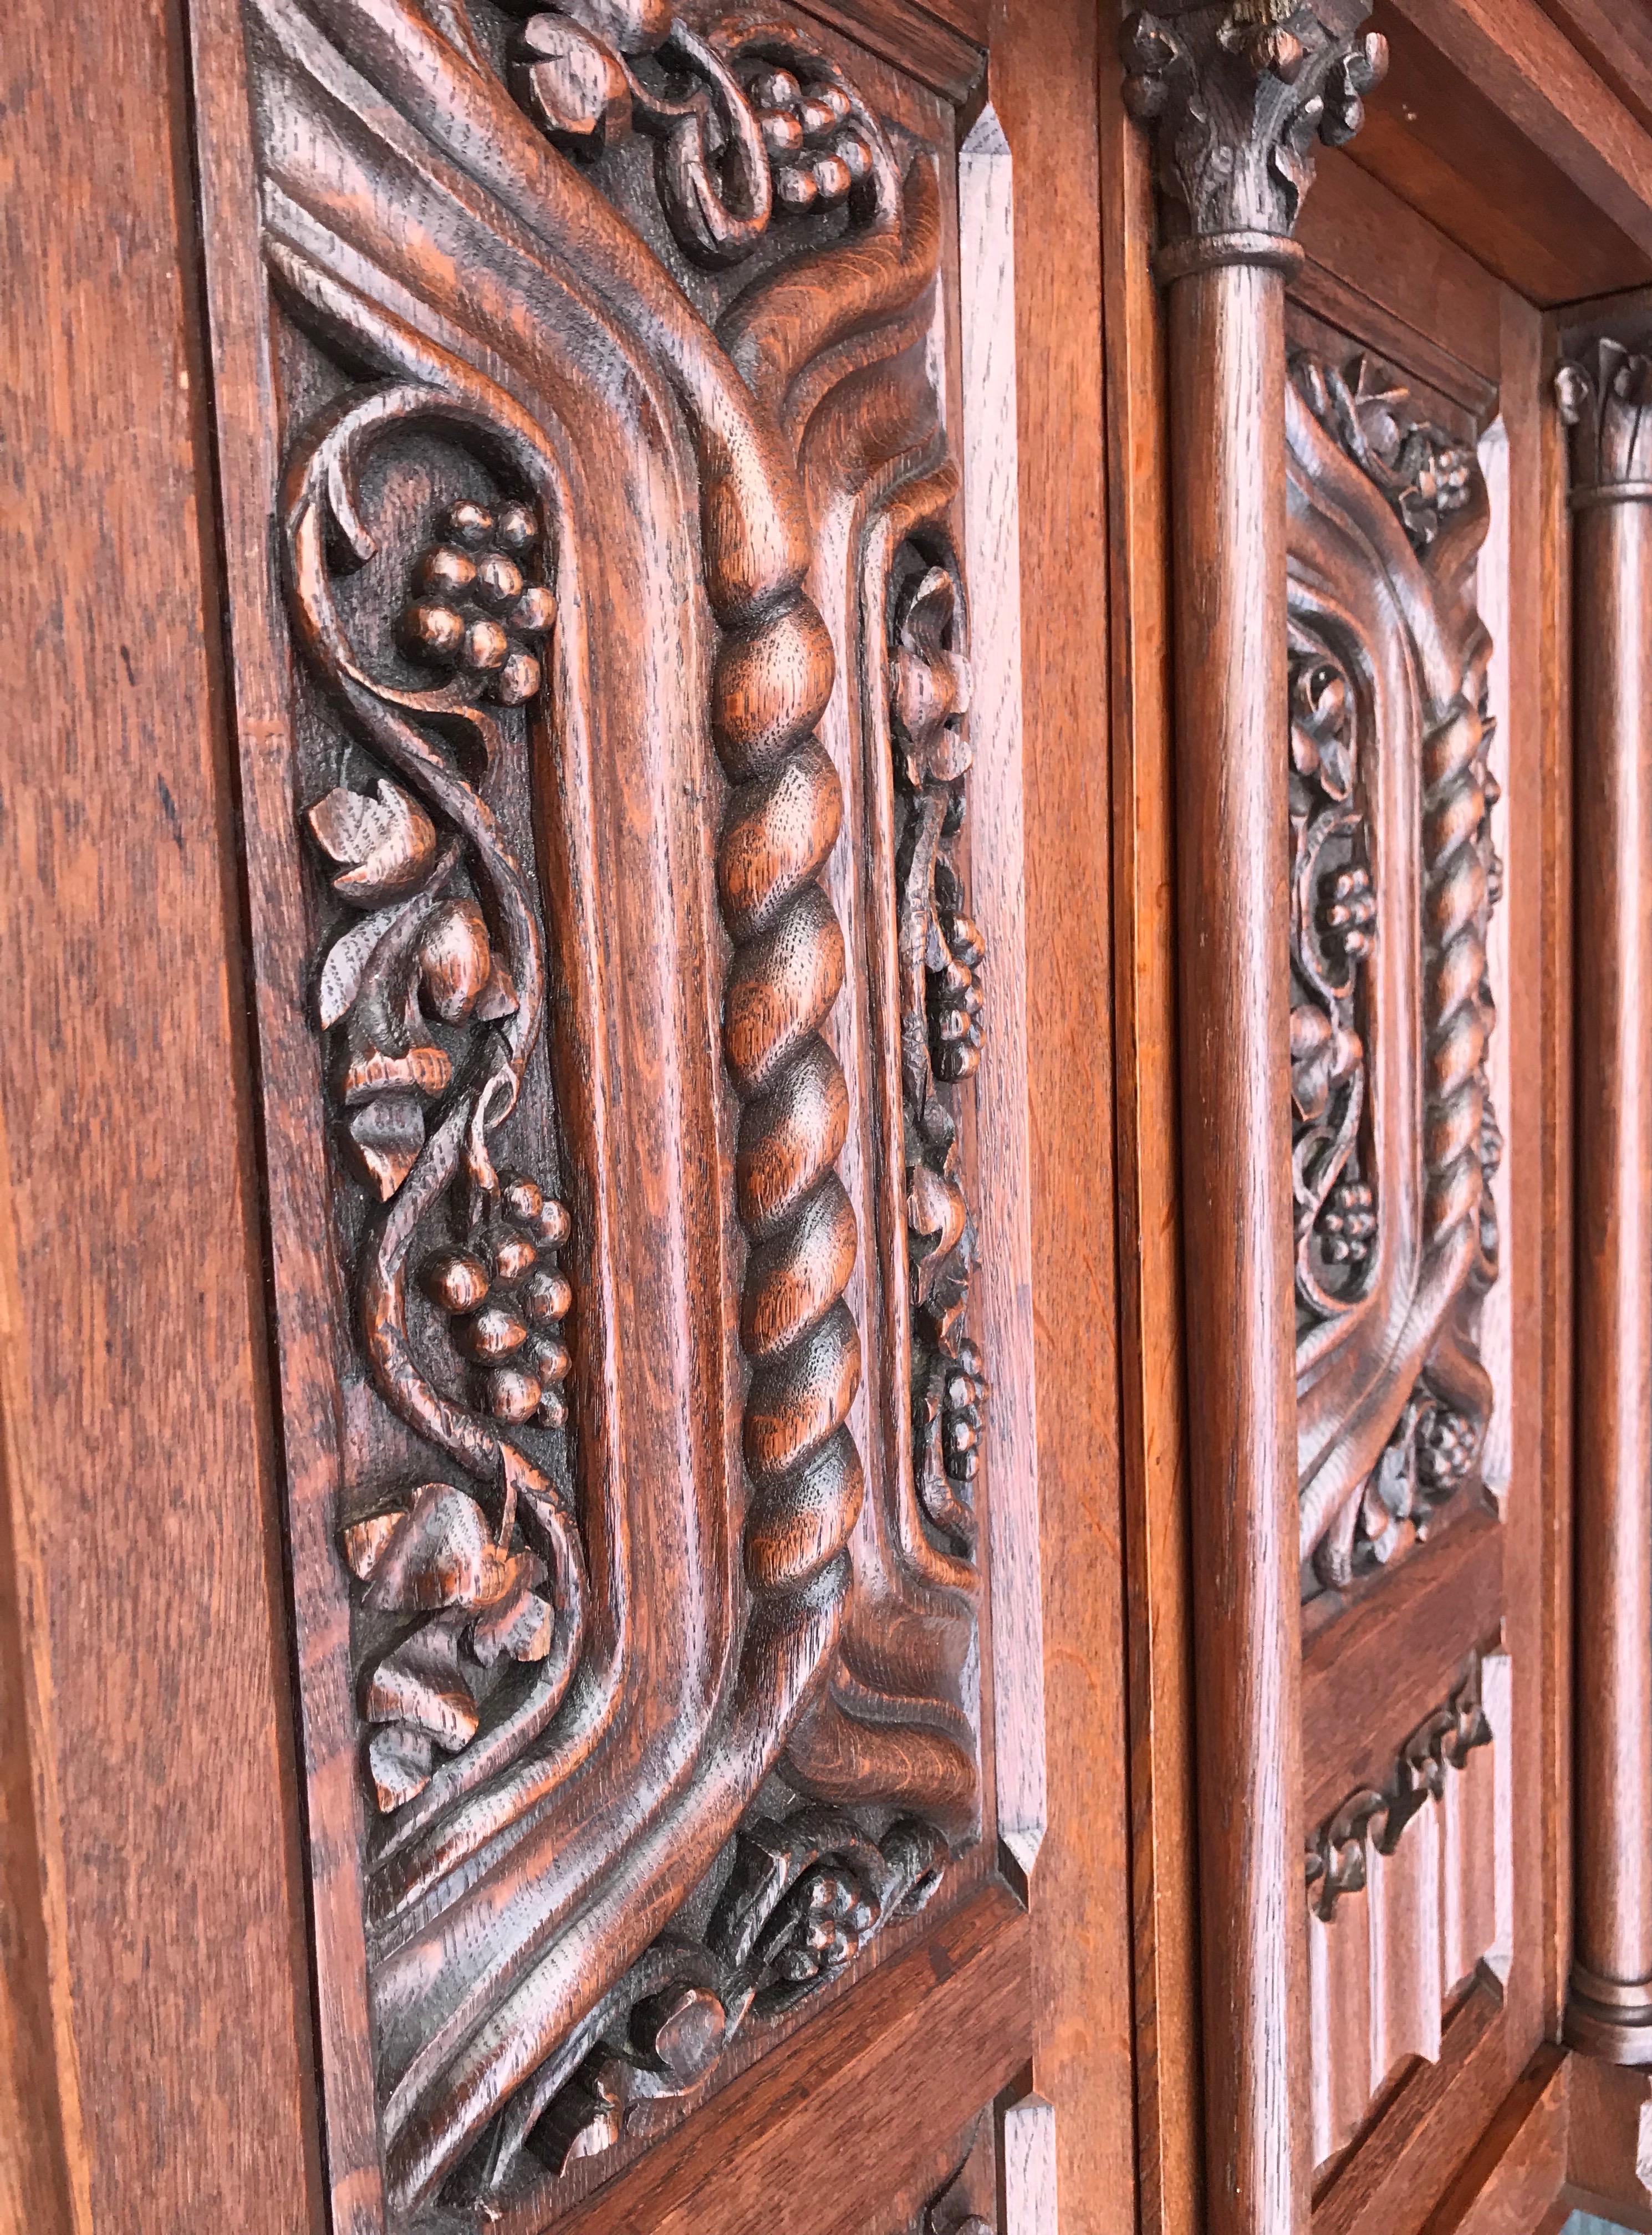 19th Century Antique Gothic Revival Hand Carved Oak Wall Cabinet with Gargoyles Sculptures